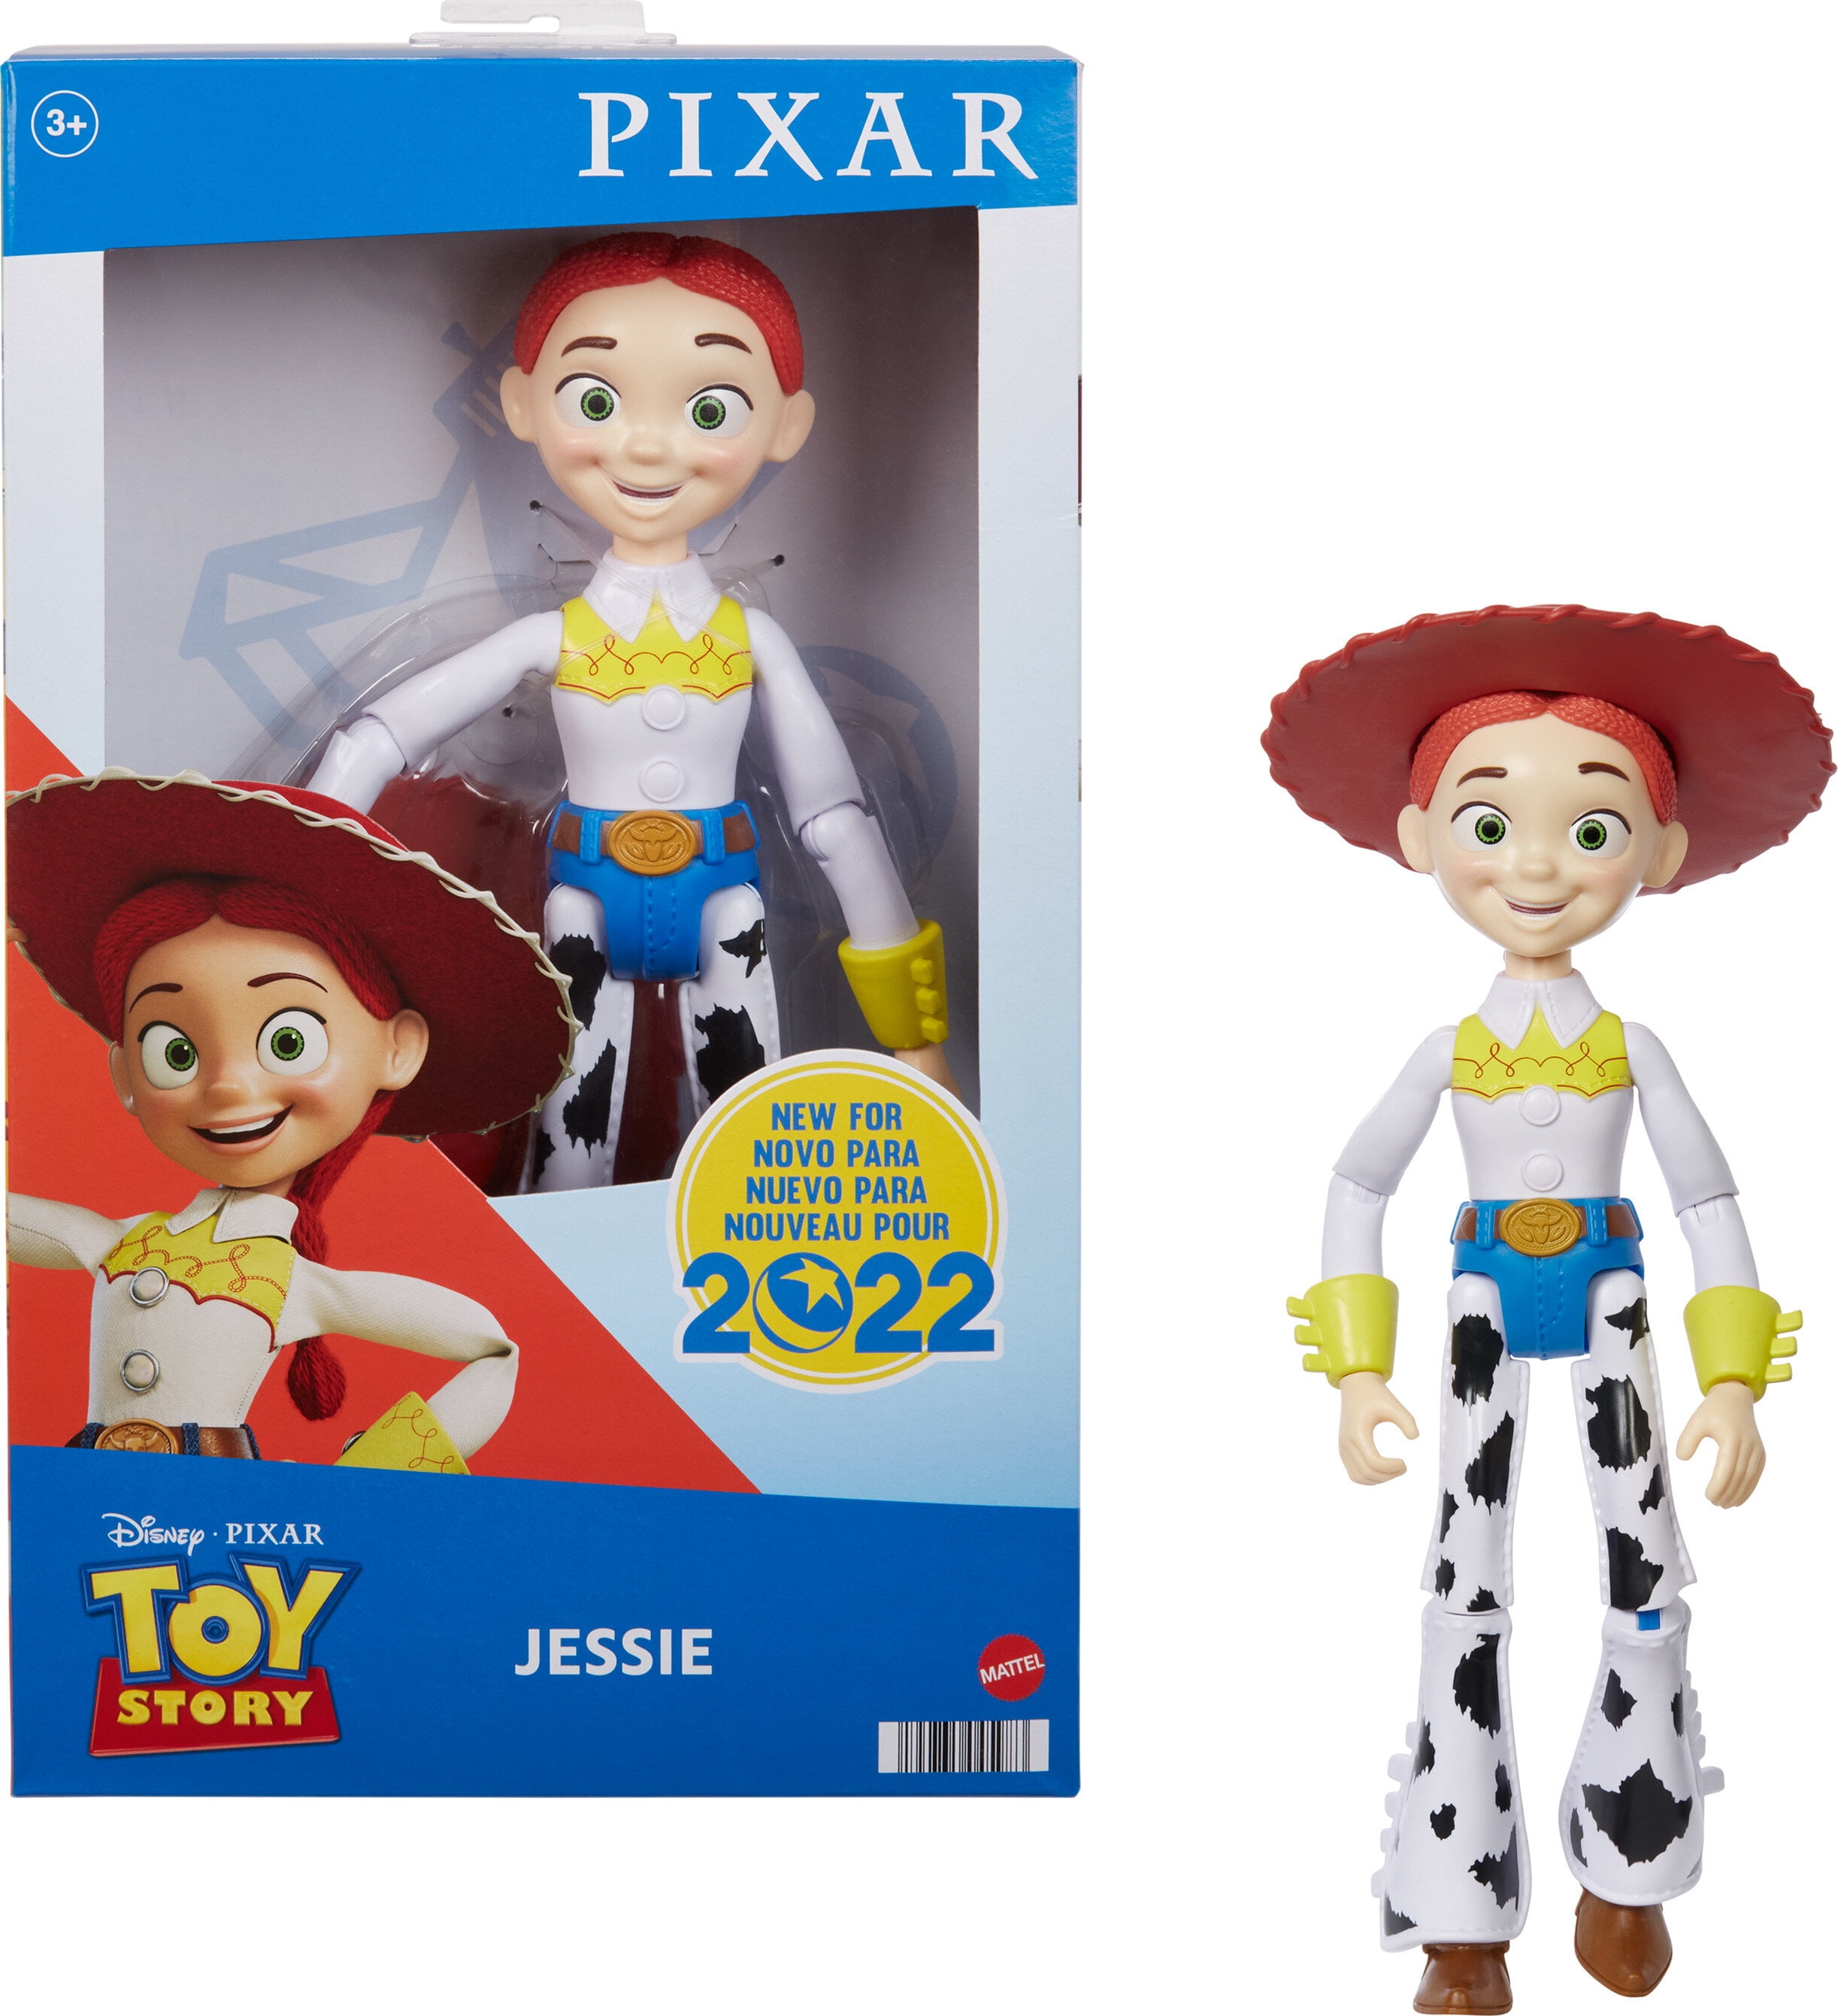 Disney Pixar Toy Story Large Jessie Action Figure, Collectible Toy